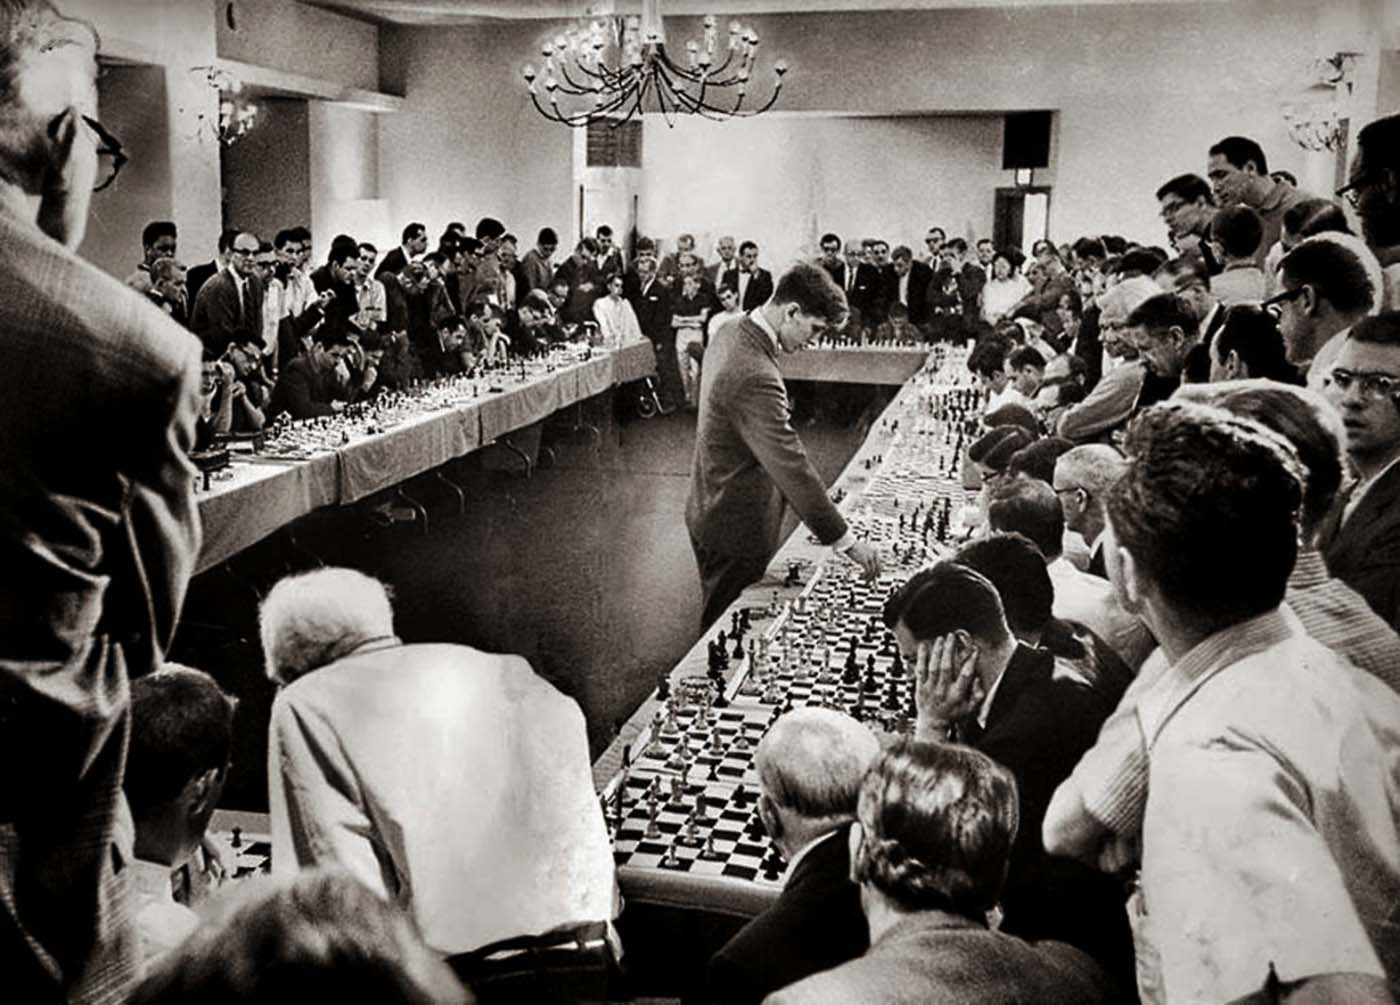 Bobby Fischer playing against 50 opponents simultaneously, 1964.